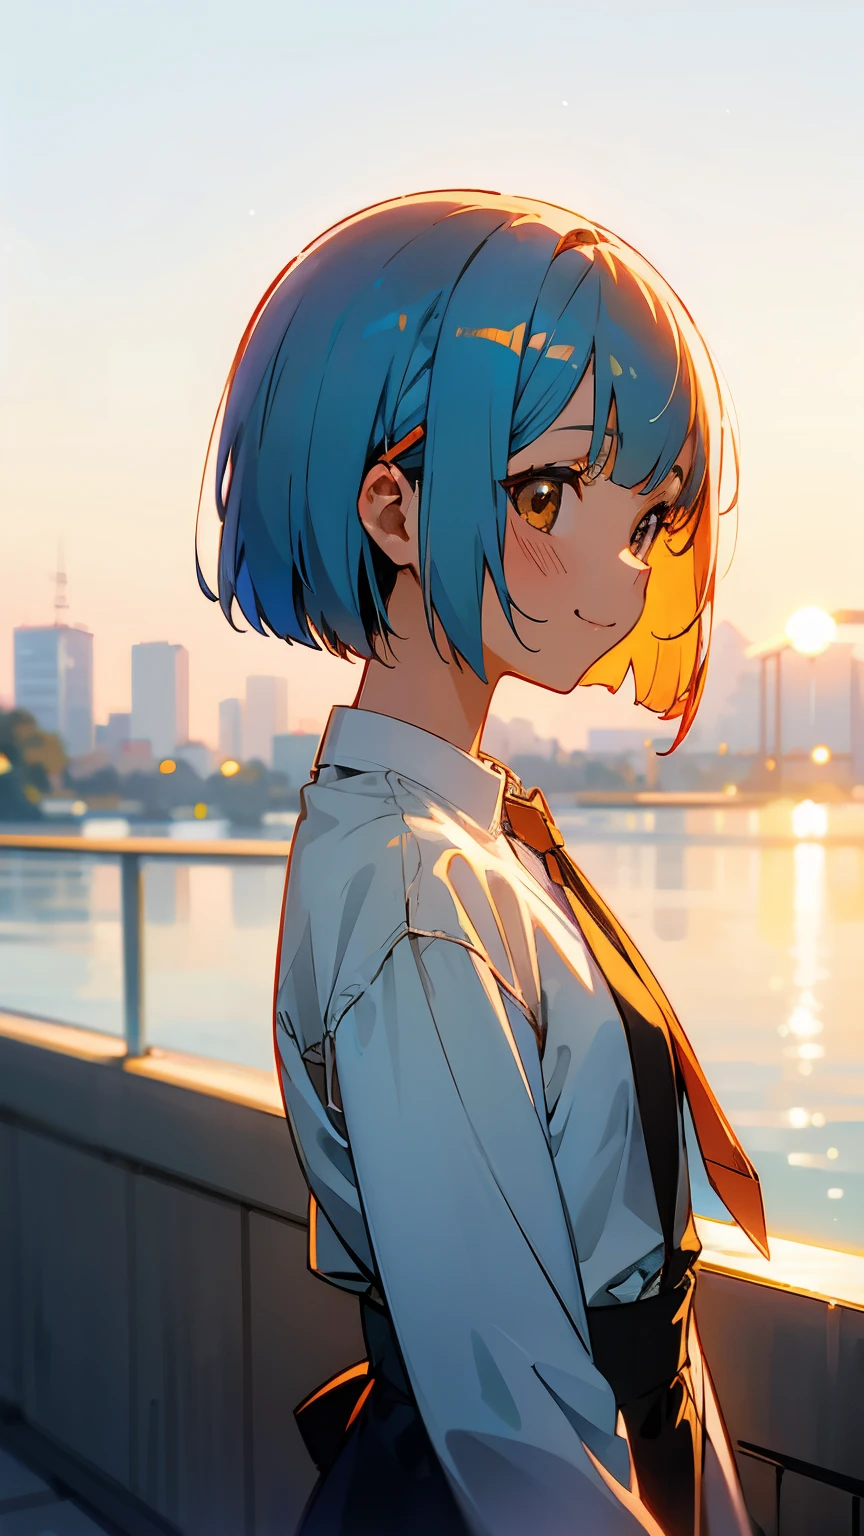 1 girl、anime picture、cute woman、shrimp、Glossy light blue hair、short bob hairstyle、Tie your hair with an orange hair clip、Beautiful brown eyes、smile、From the side、sharp outline、Morning Cafe Terrace、background bokeh、written boundary depth